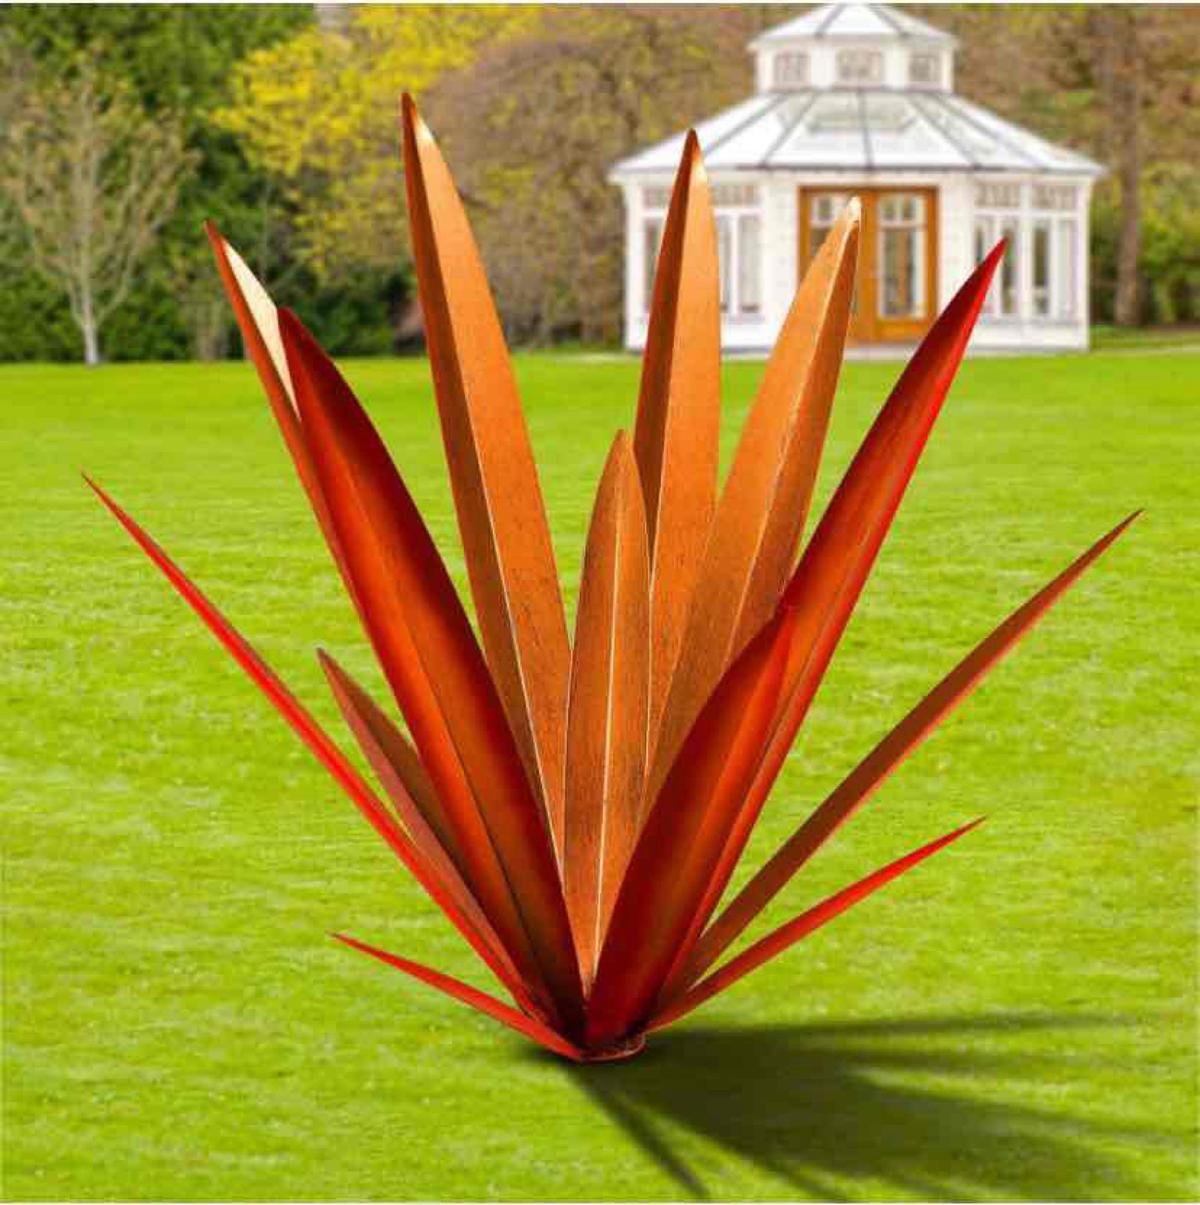 Large Leaf Thickened Metal Agave Plant Outdoor Decoration Desert Courtyard Art Plant Garden